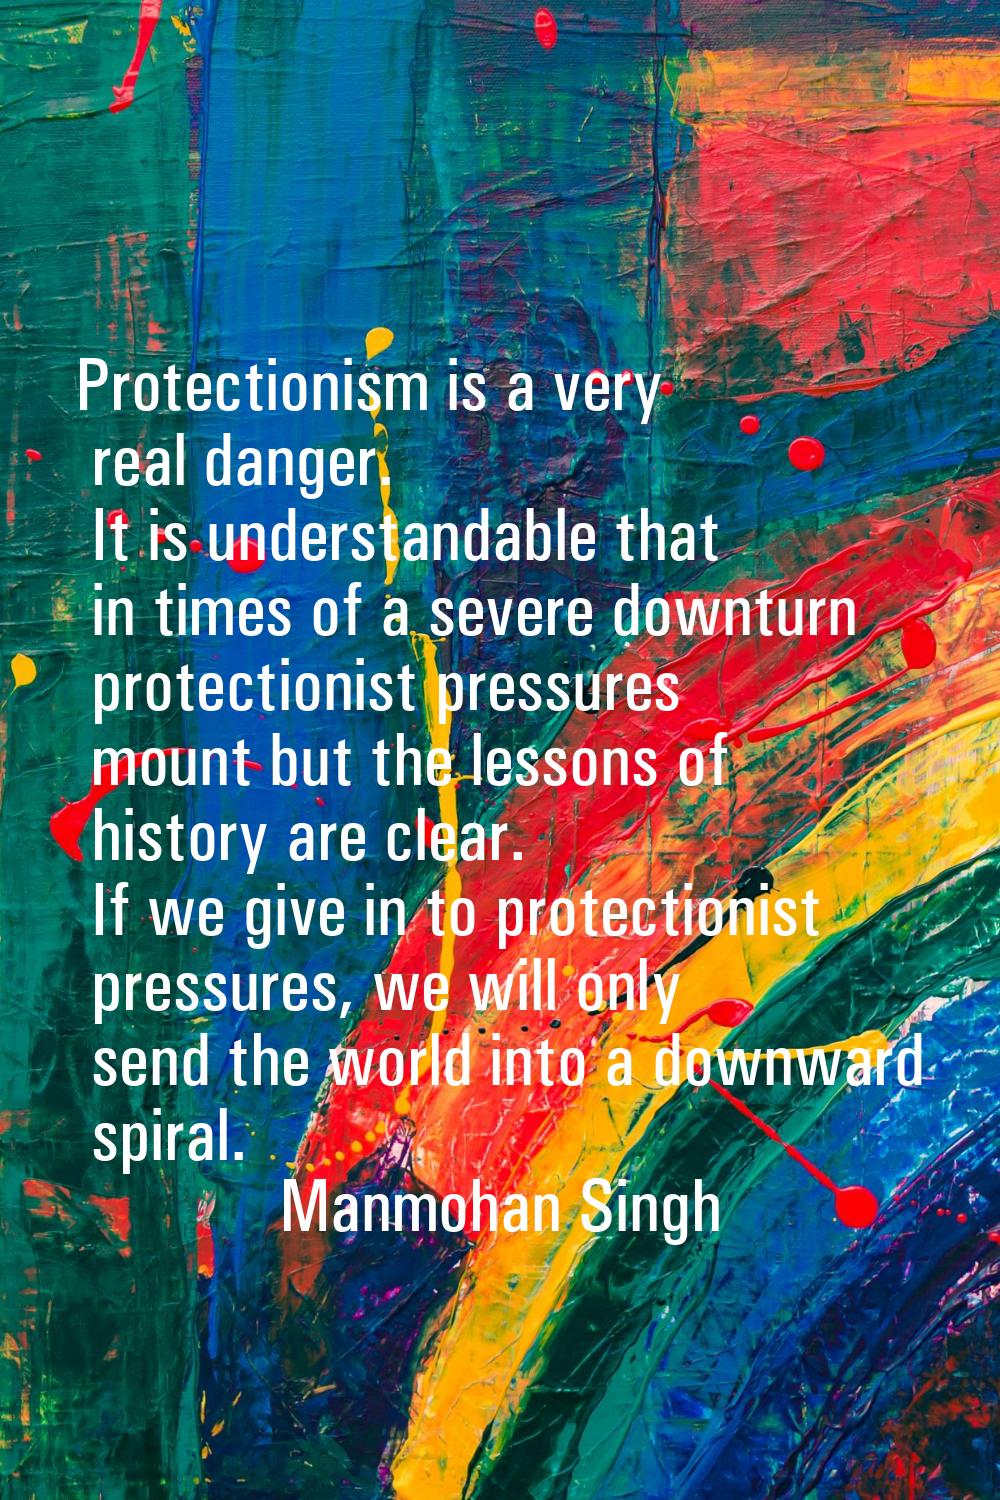 Protectionism is a very real danger. It is understandable that in times of a severe downturn protec